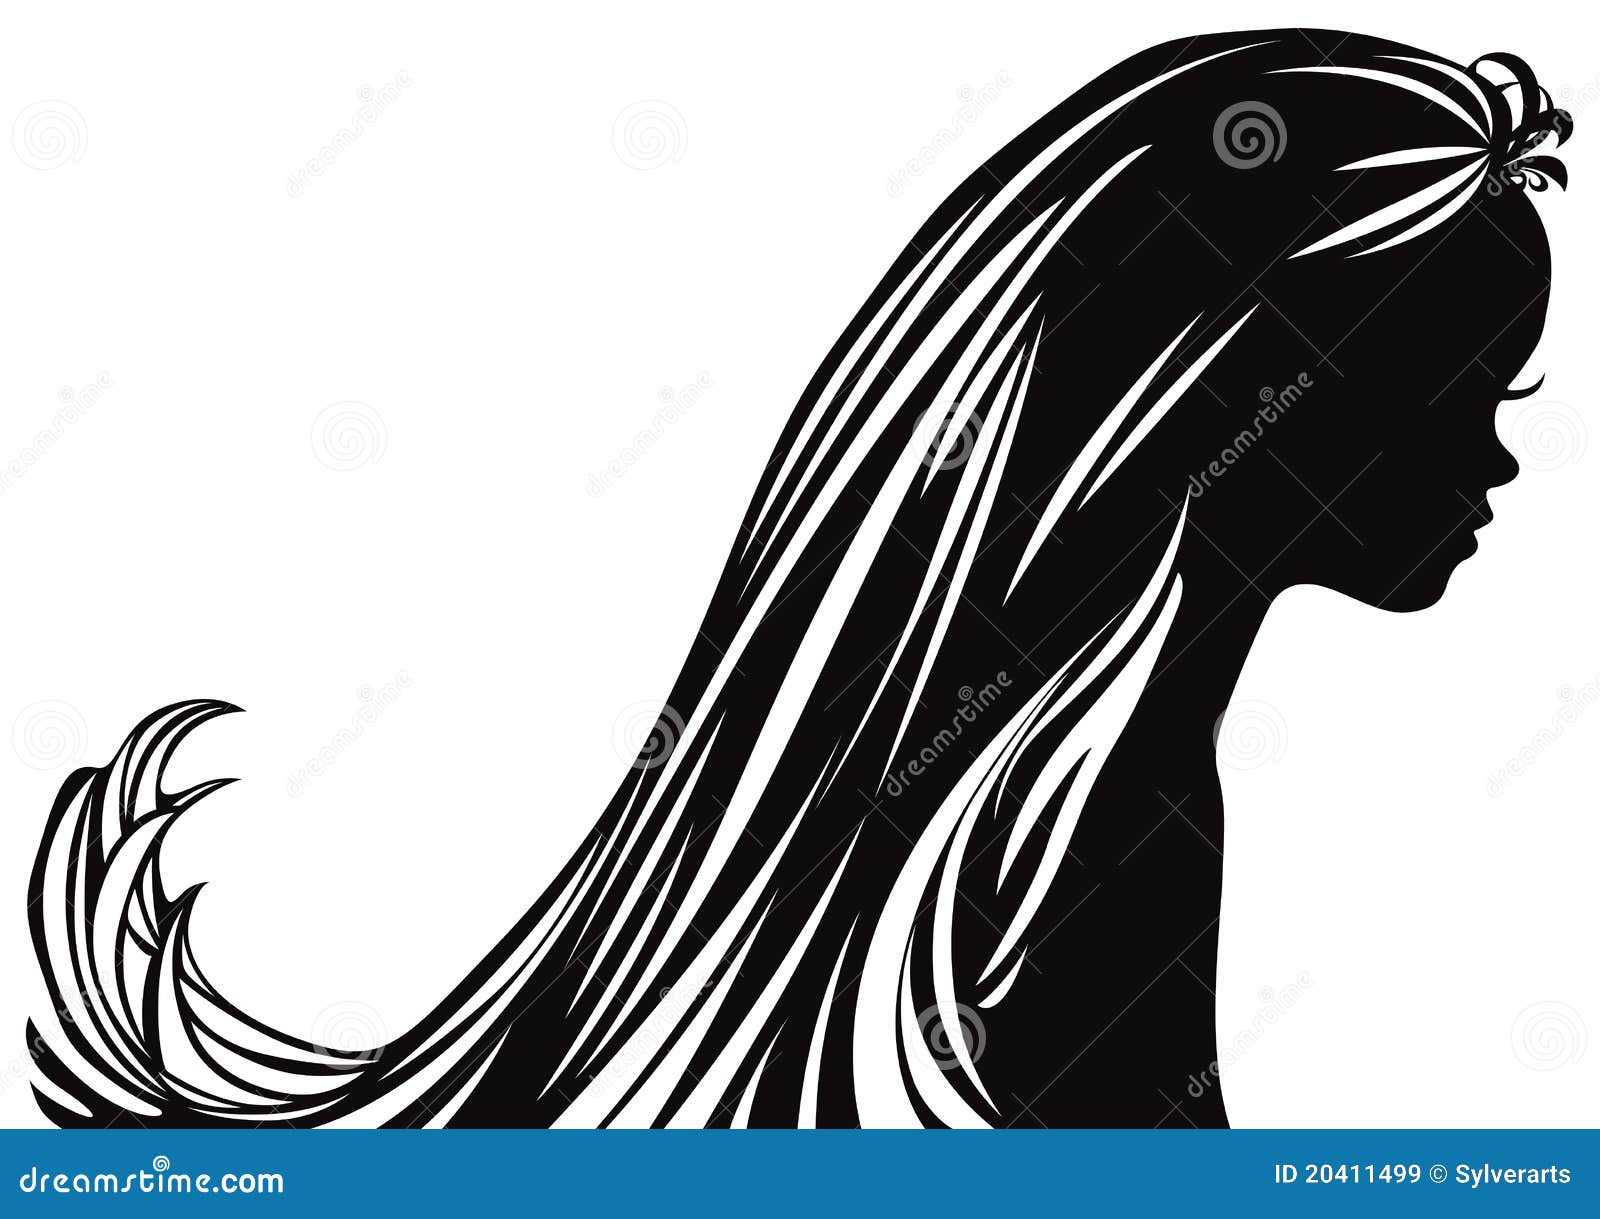 Beautiful Girl Silhouette. Royalty Free Stock Images 